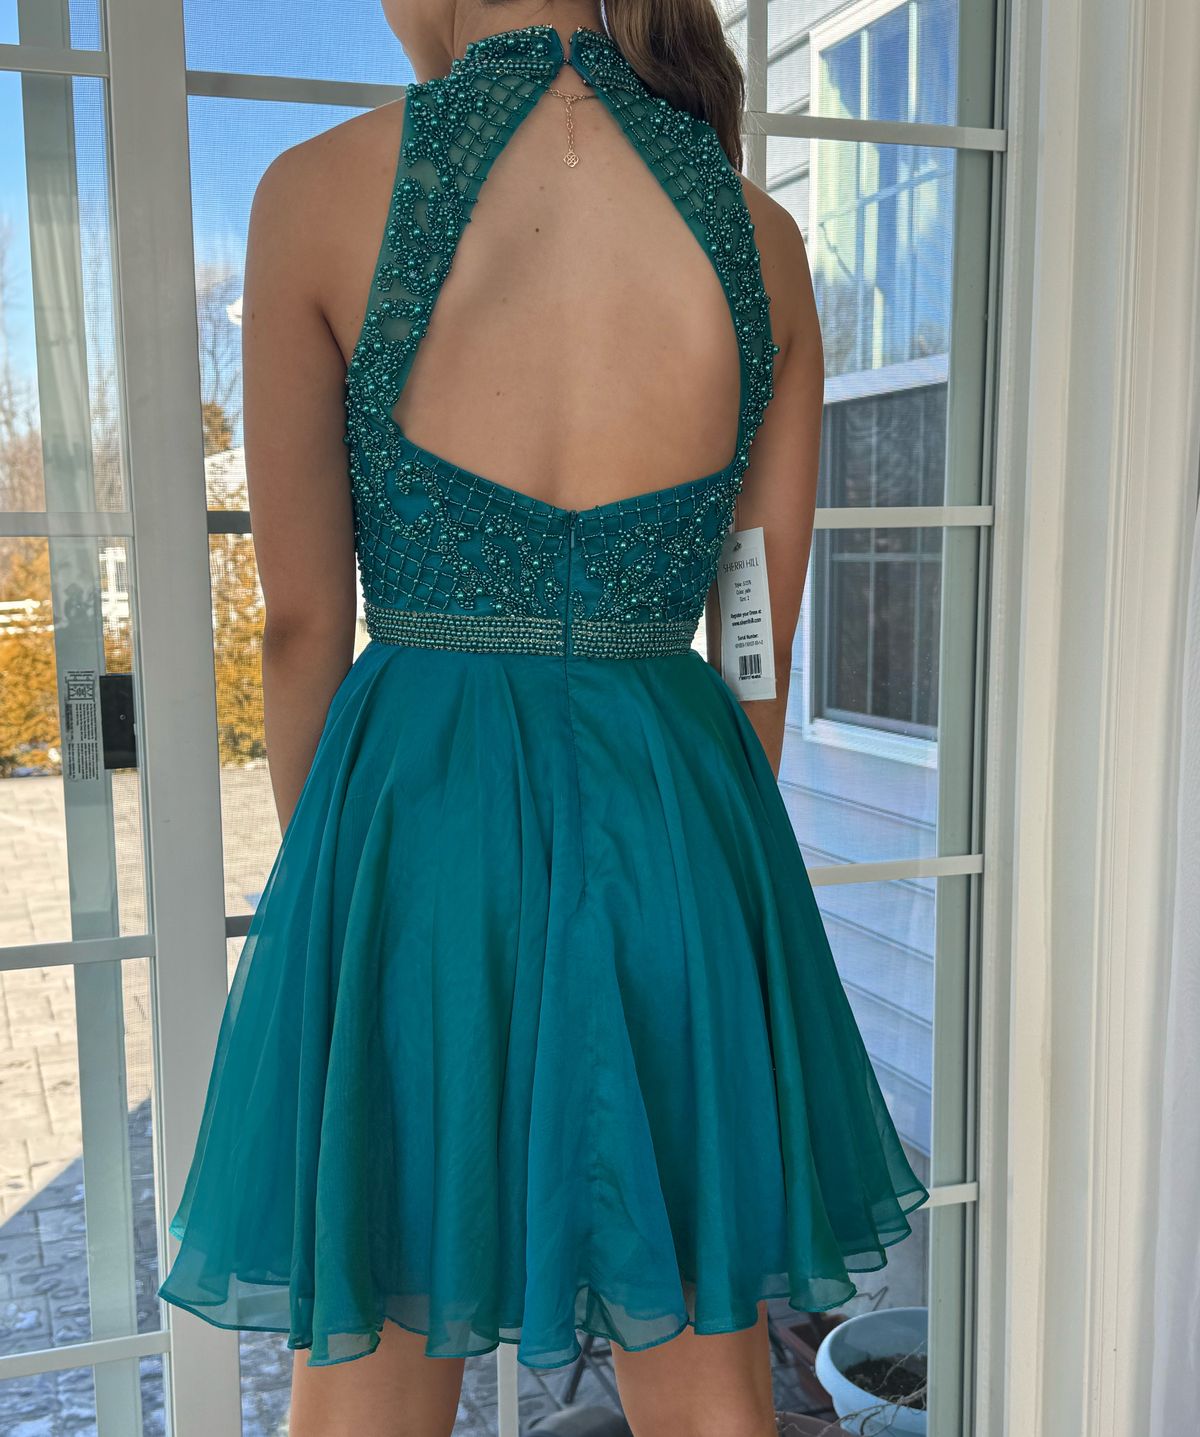 Style 51276 Sherri Hill Size 2 Prom High Neck Blue Cocktail Dress on Queenly